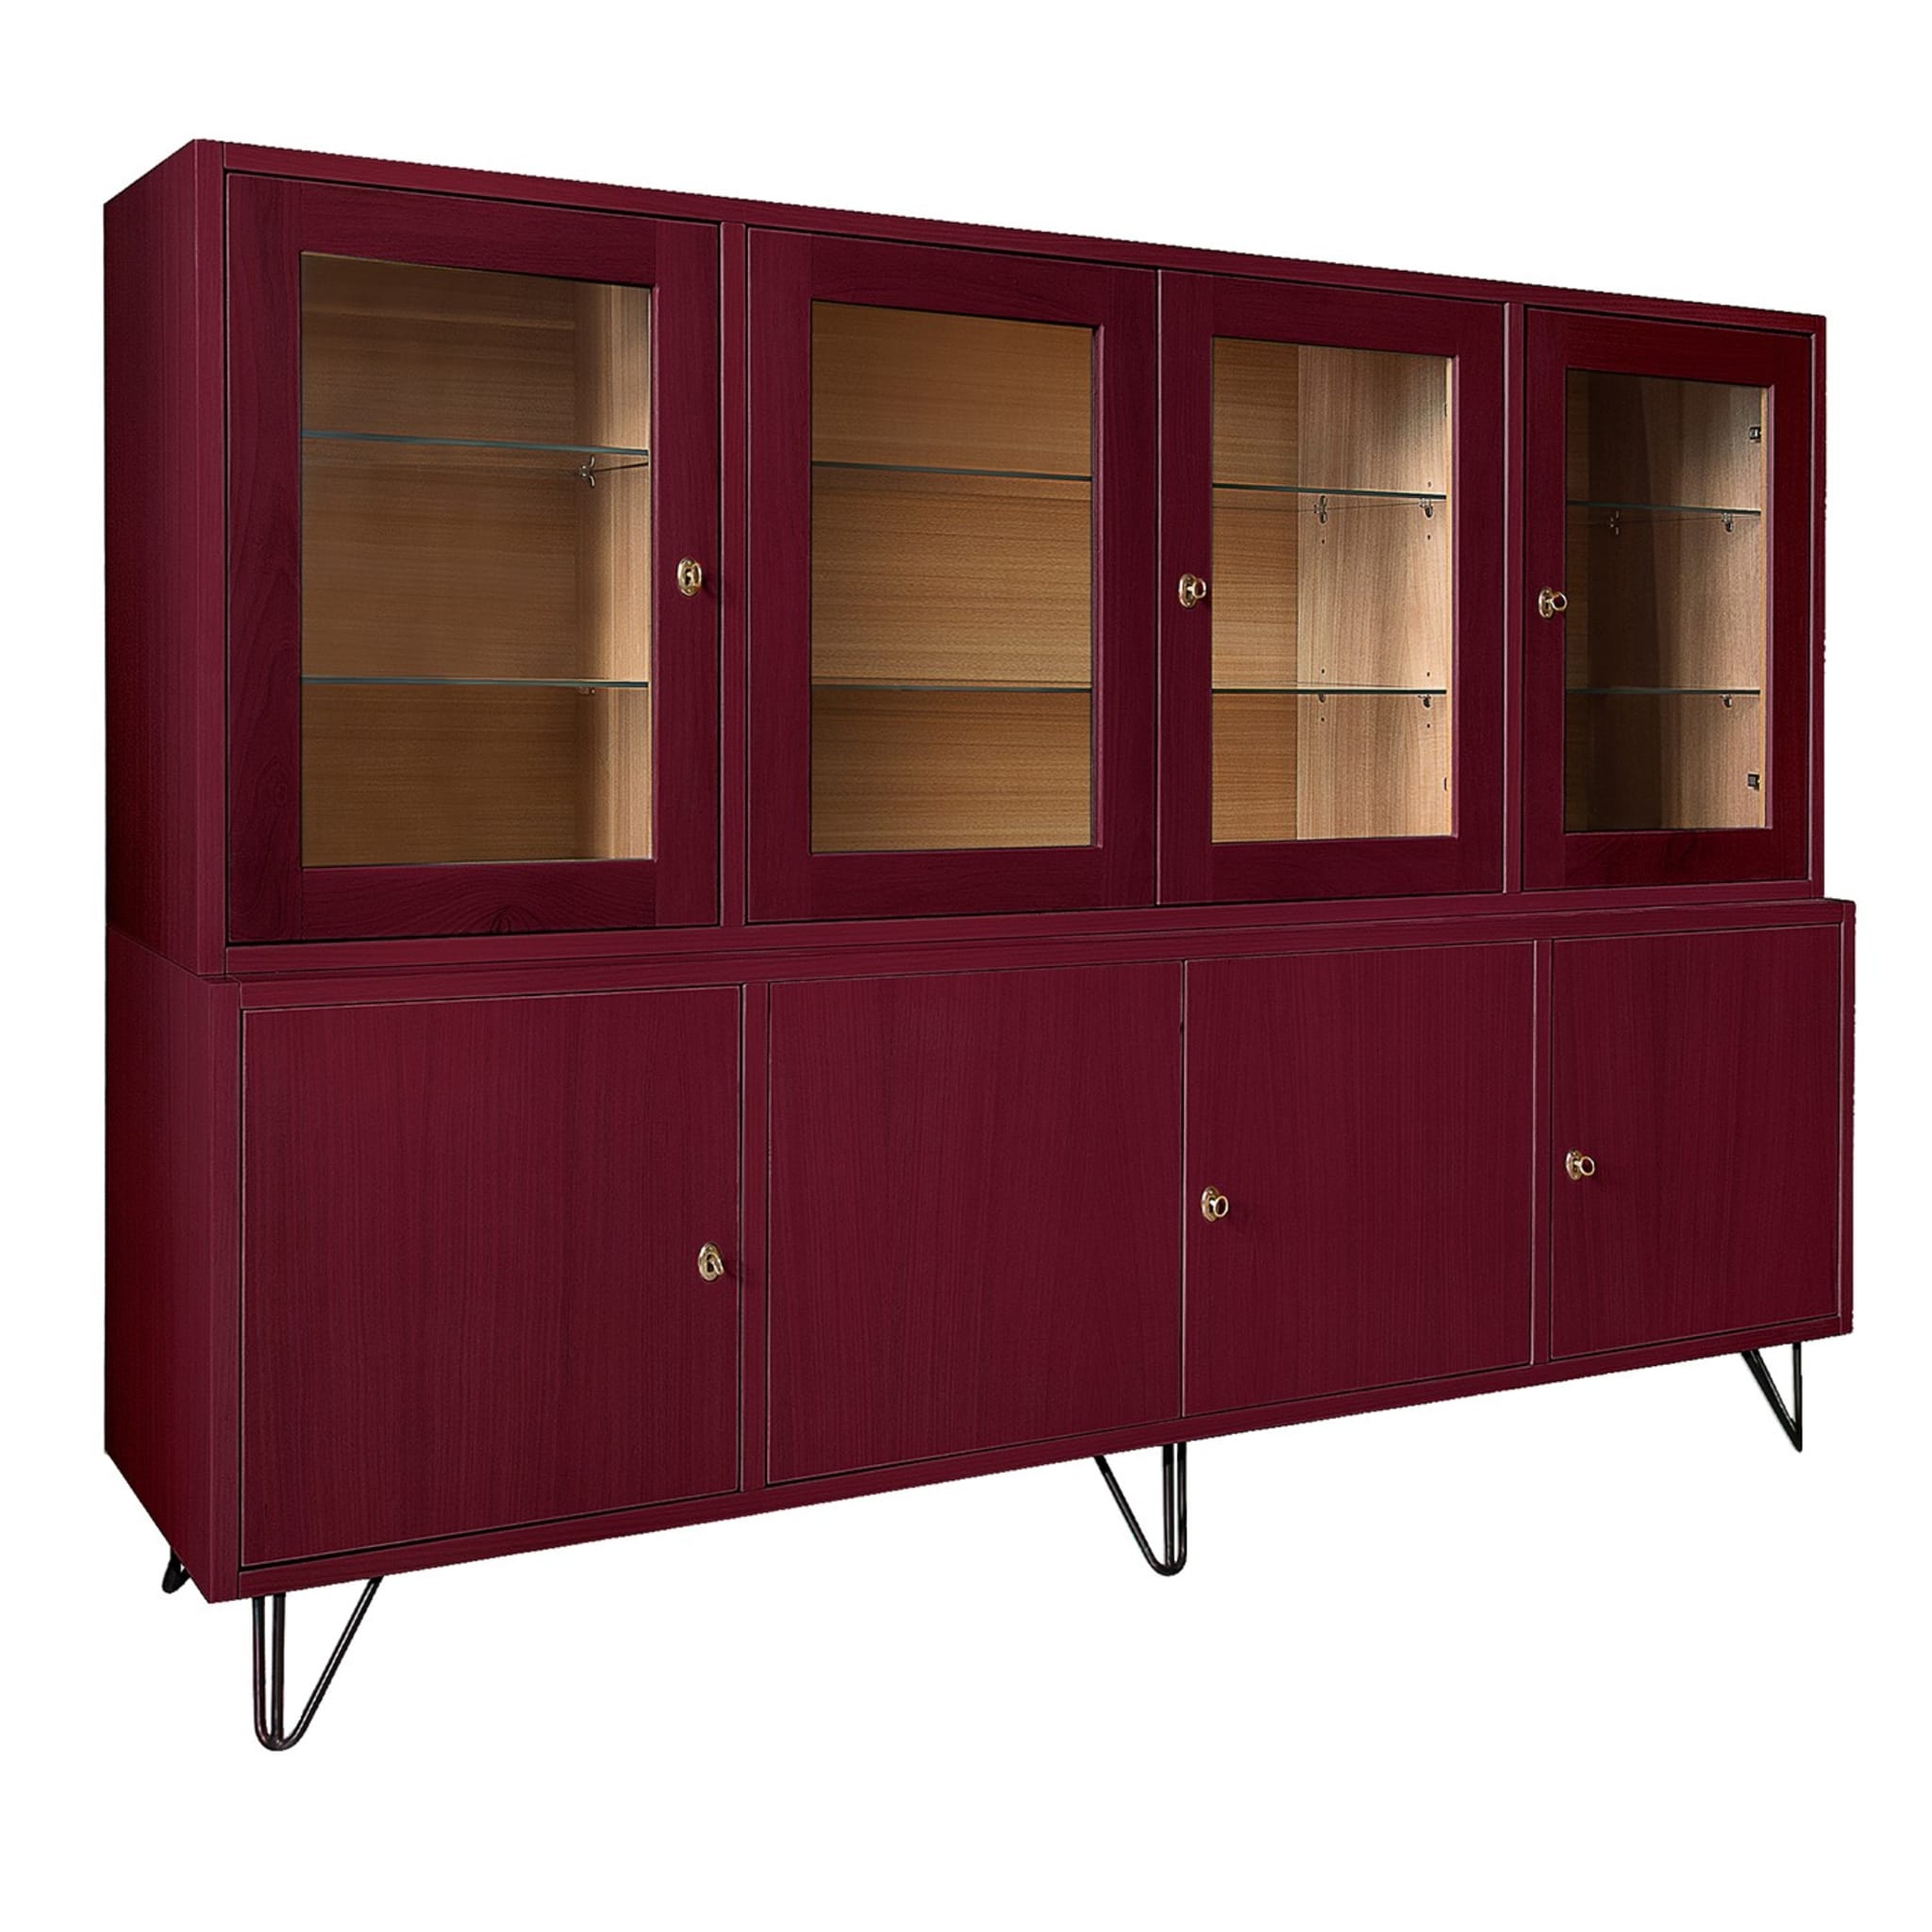 Eroica Burgundy Cabinet by Eugenio Gambella - Main view